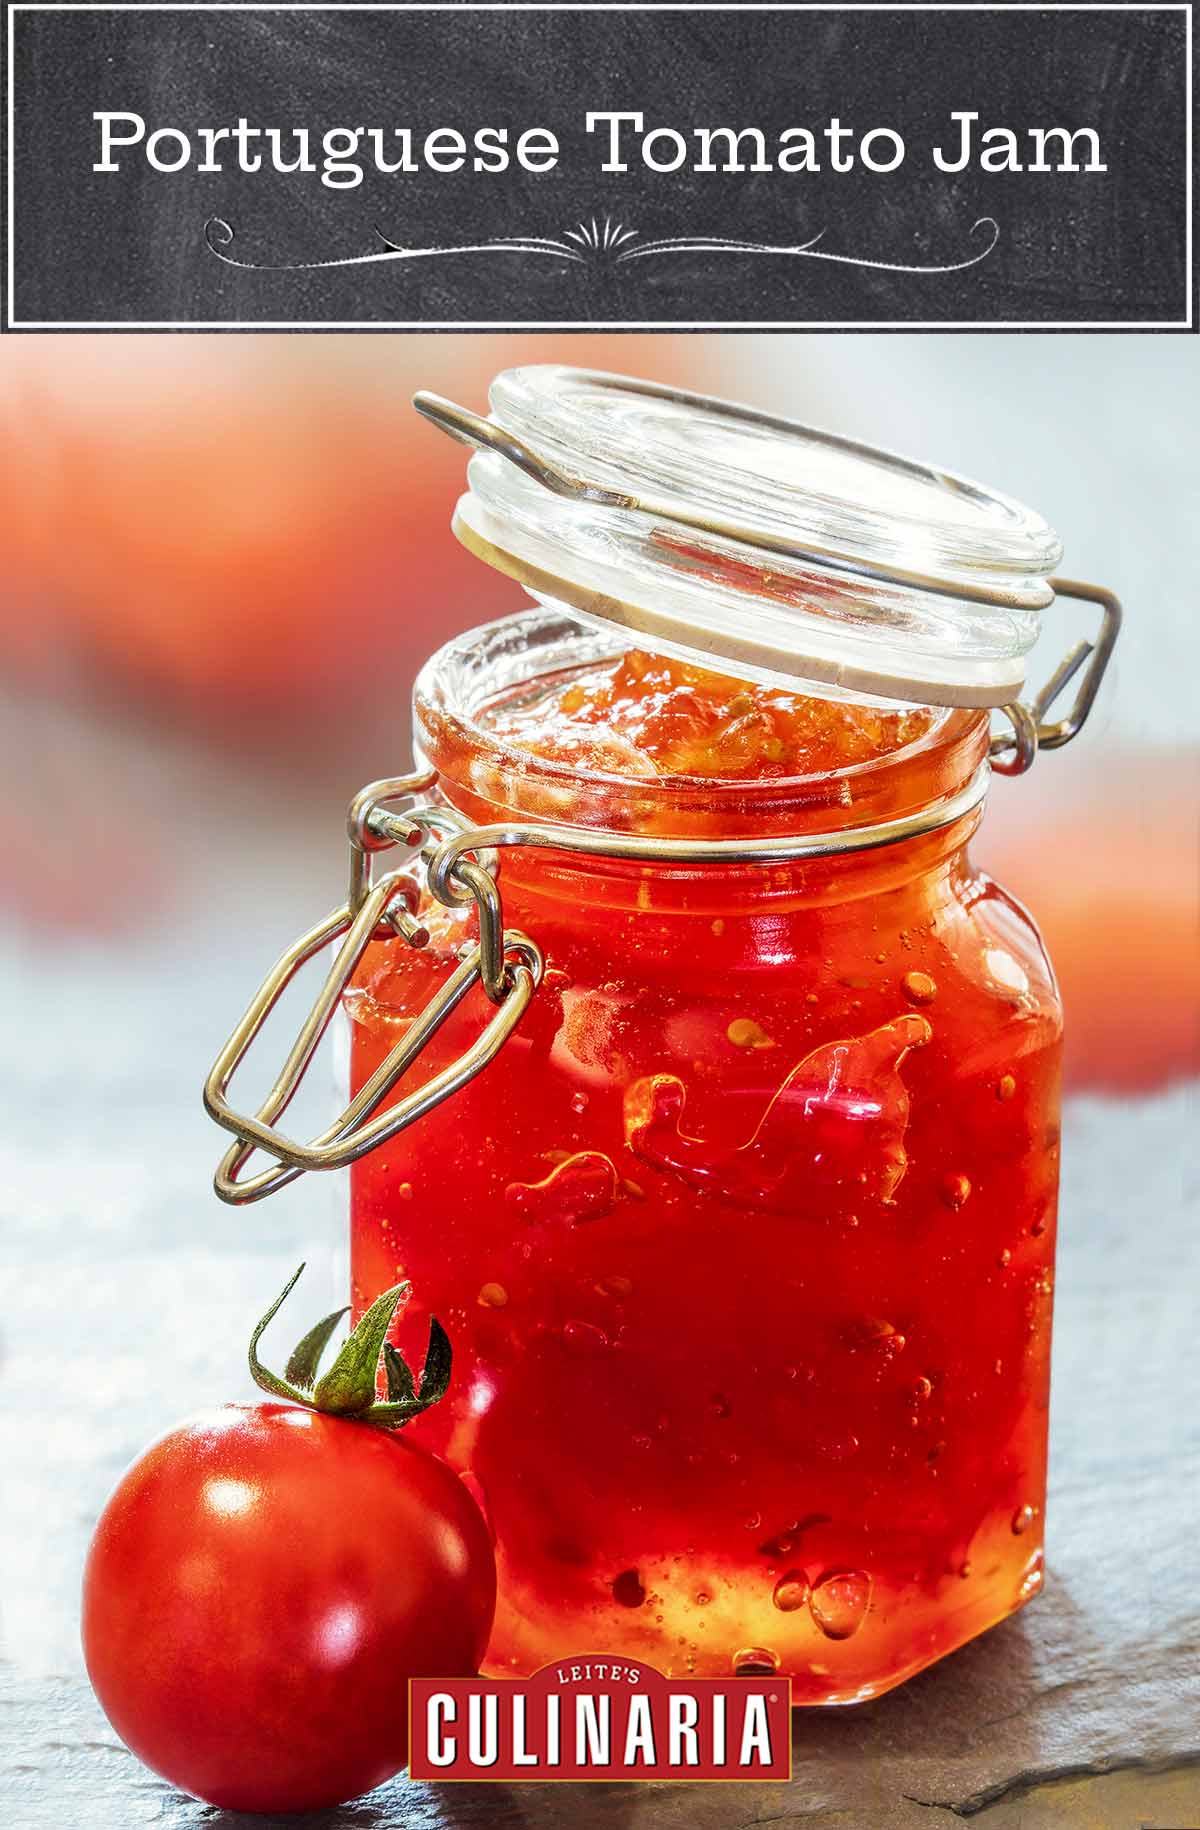 A jar of Portuguese tomato jelly with a small tomato next to it.